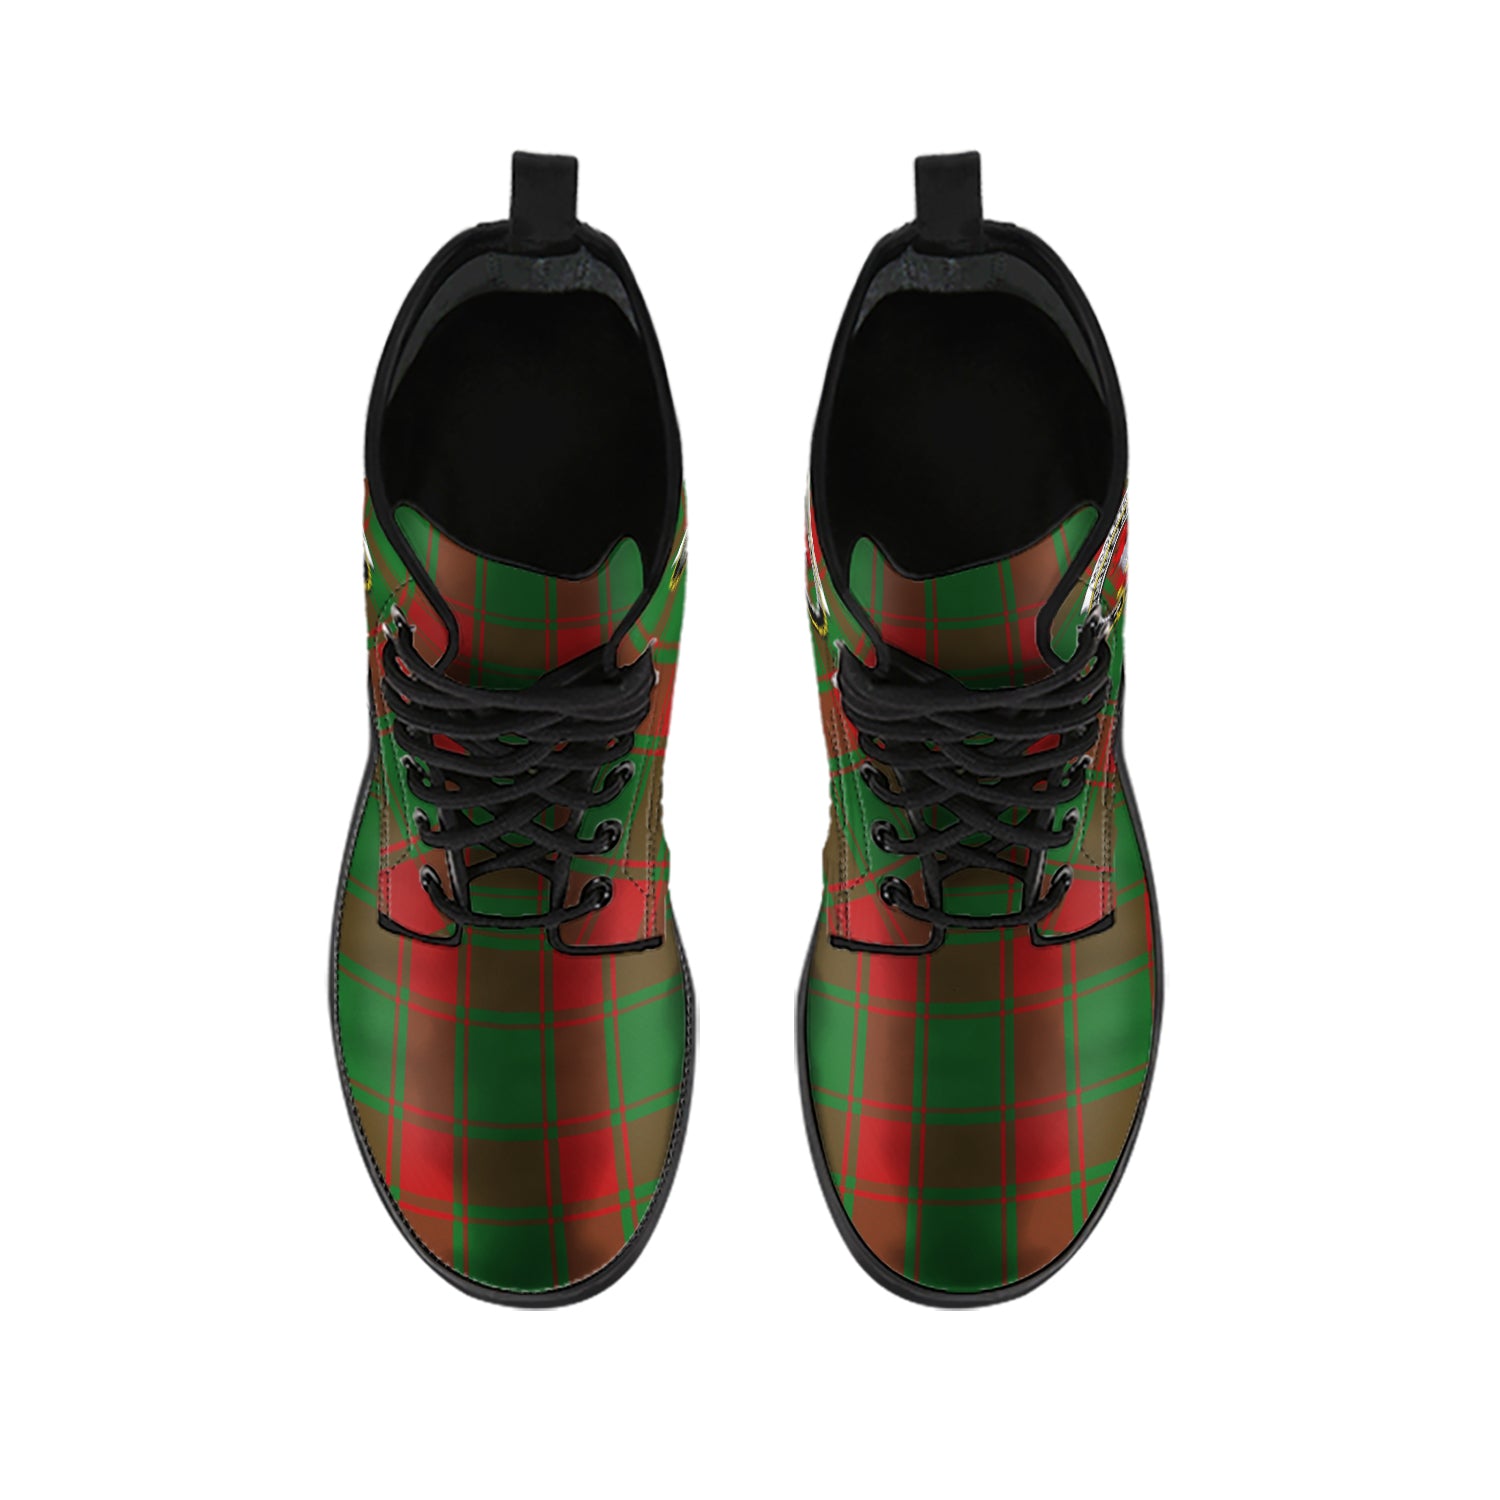 middleton-tartan-leather-boots-with-family-crest